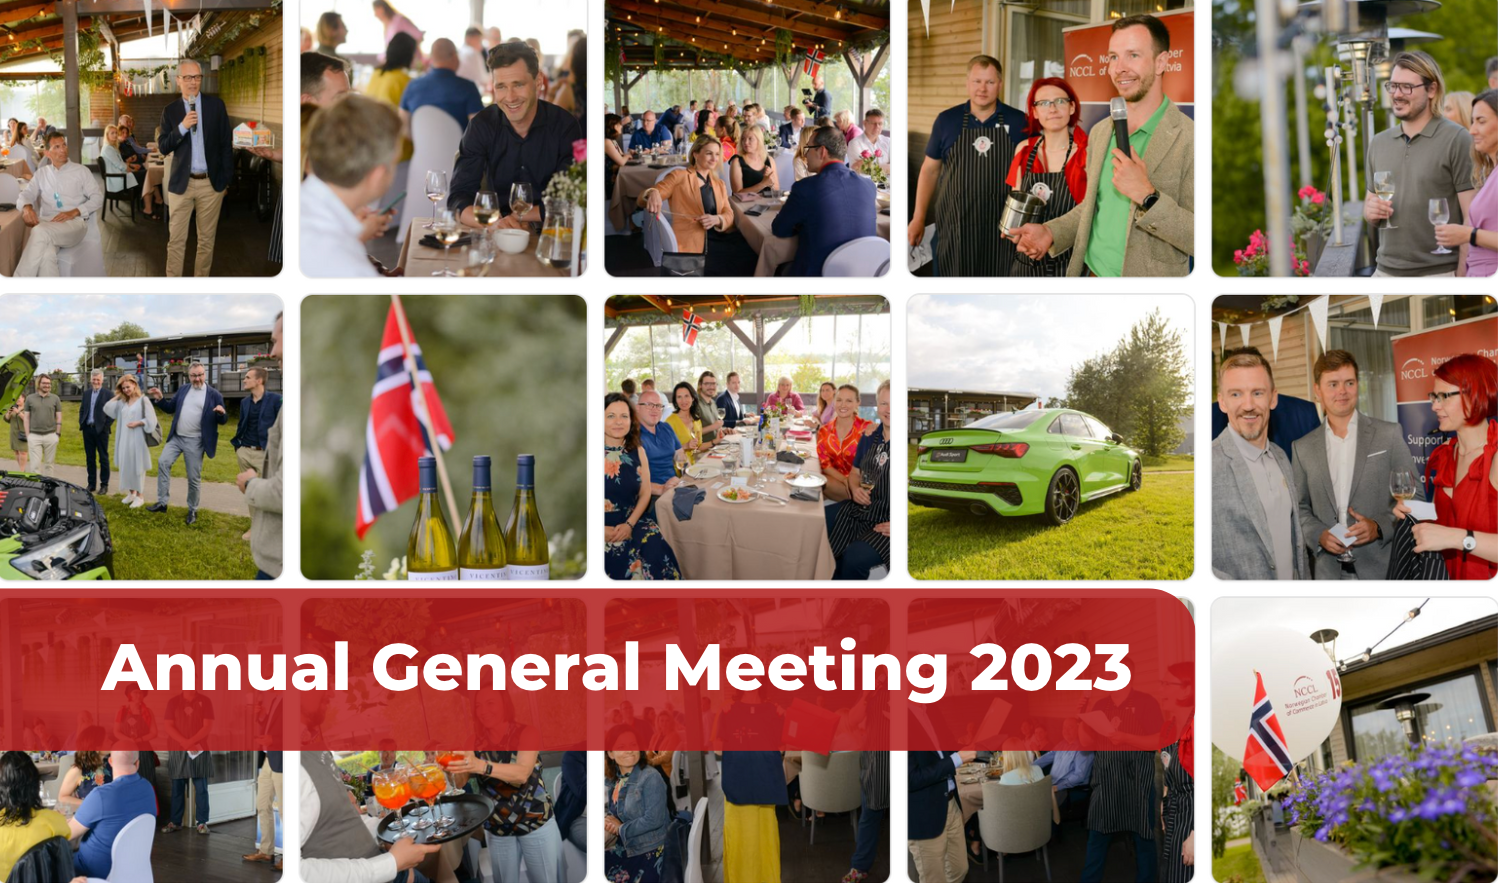 NCCL Annual General Meeting 2023